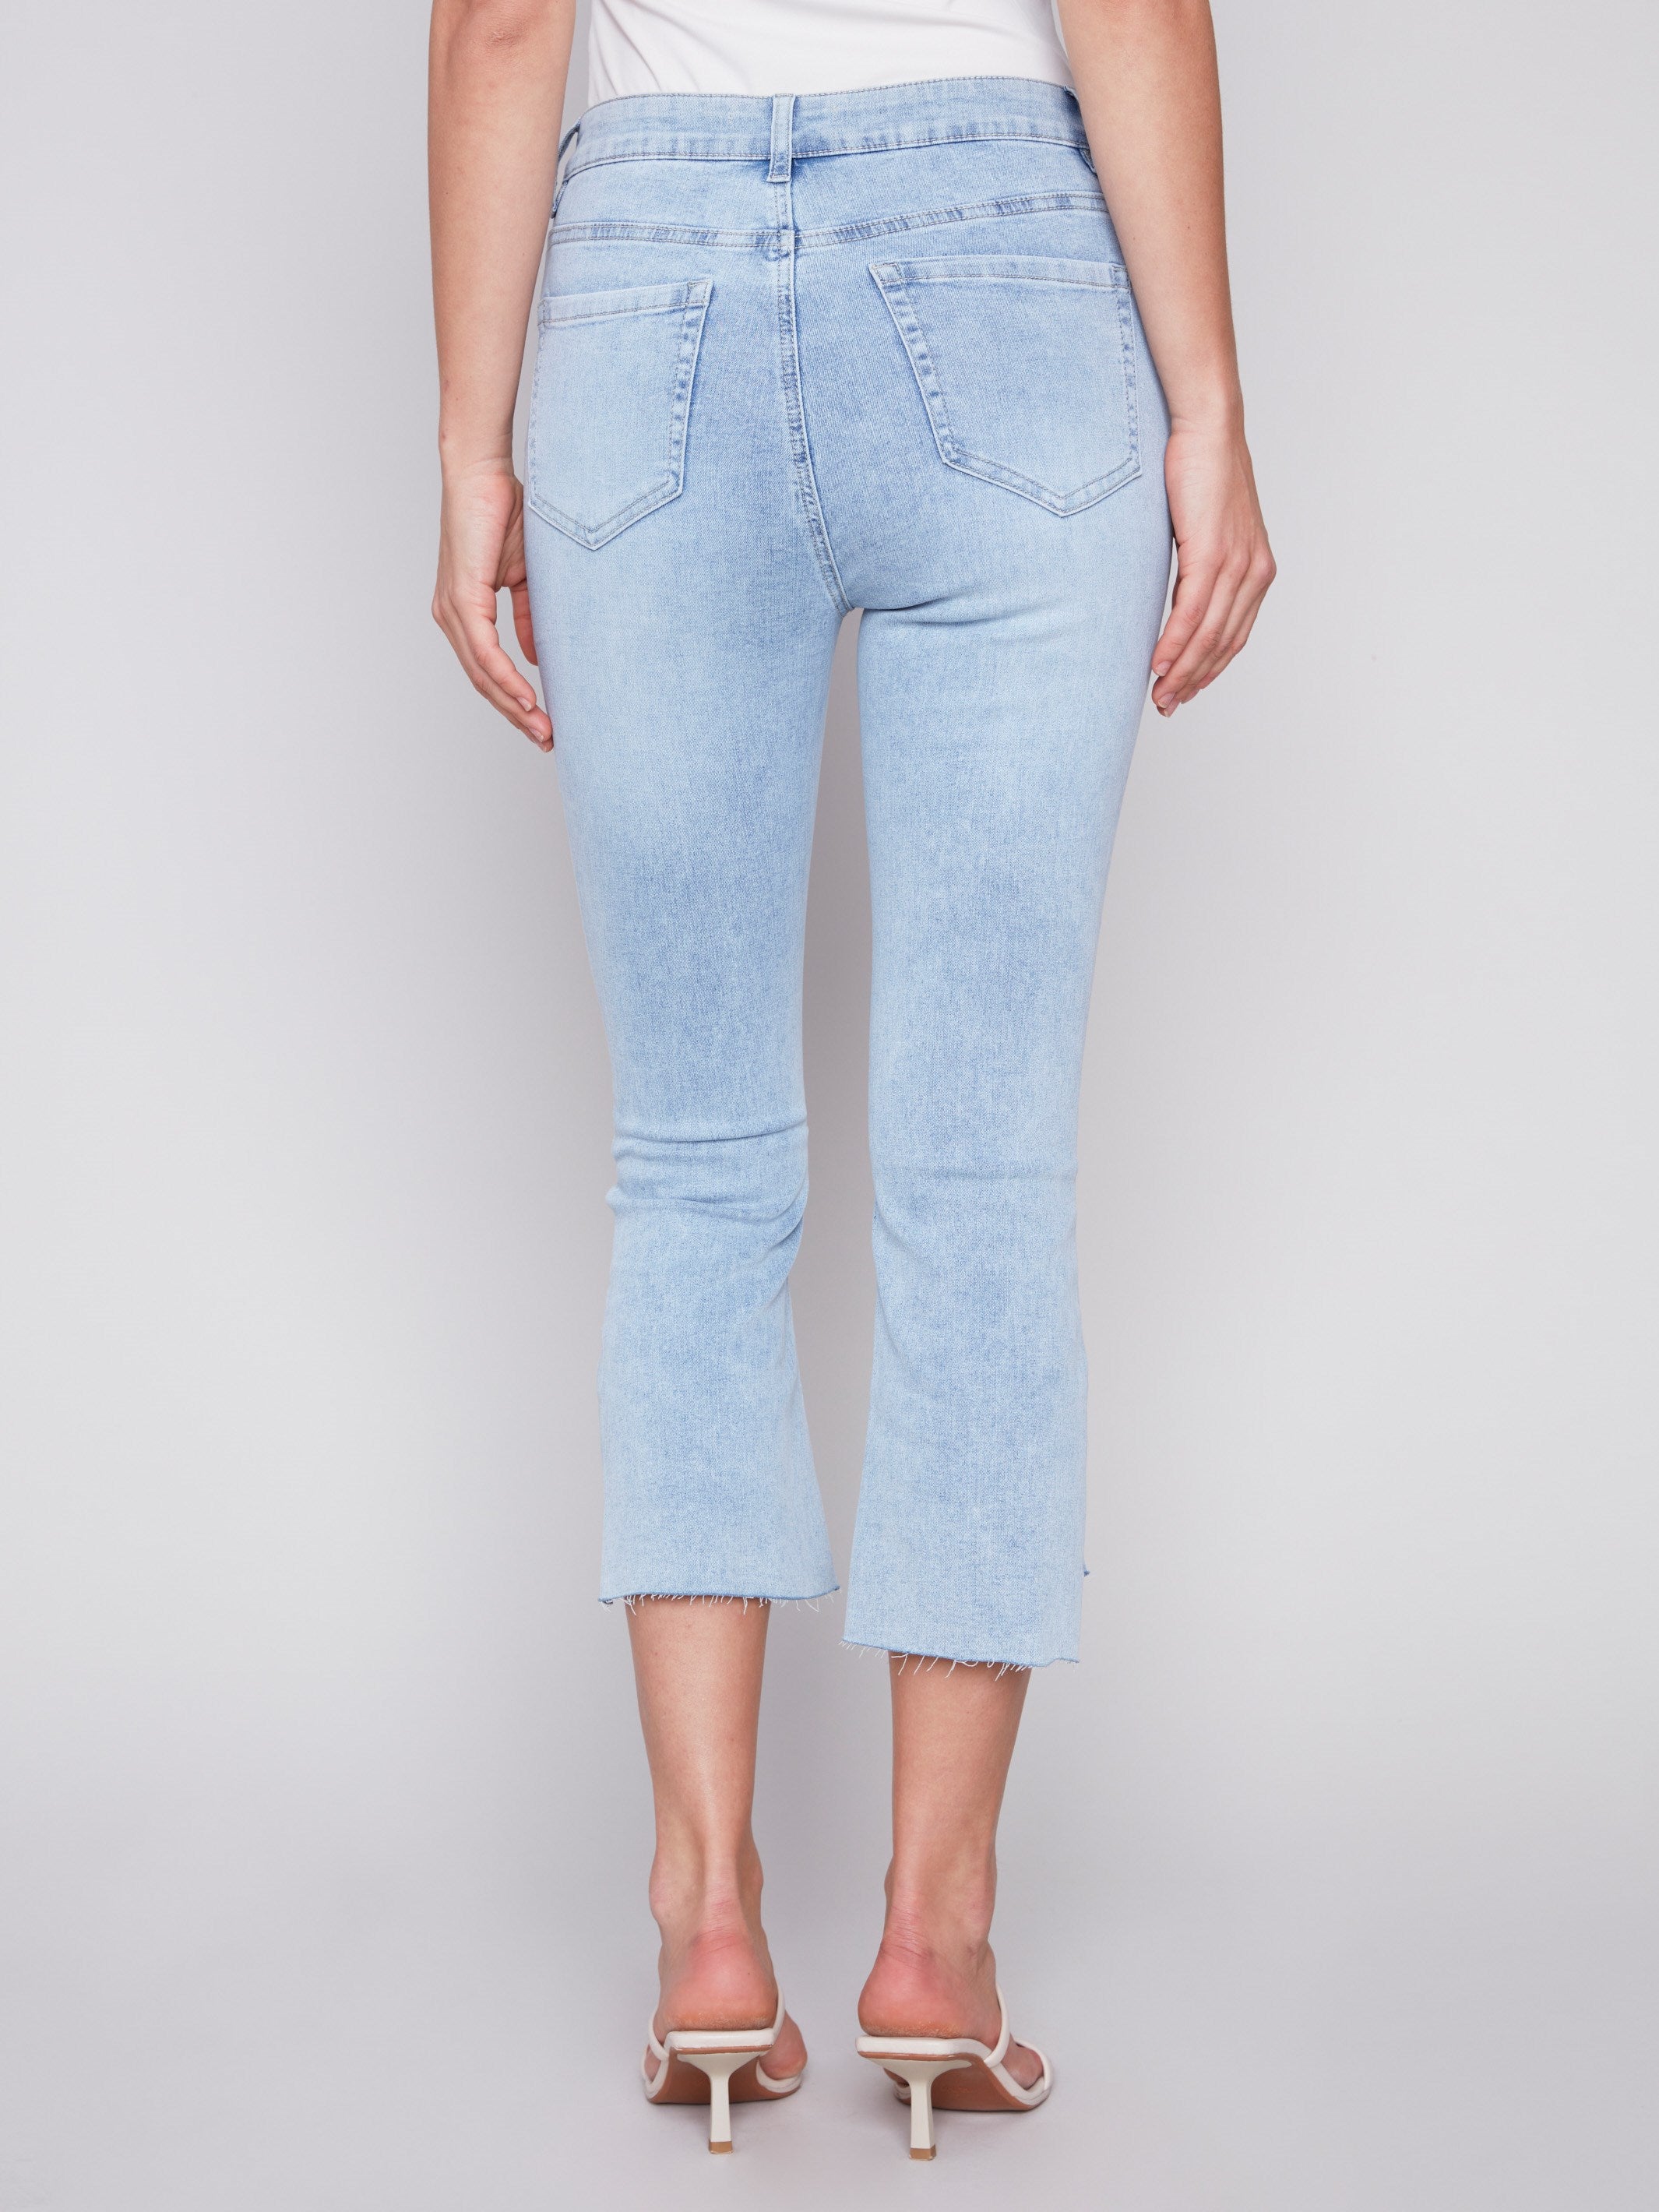 Charlie B Cropped Bootcut Jeans with Asymmetrical Hem - Bleach Blue - Image 3